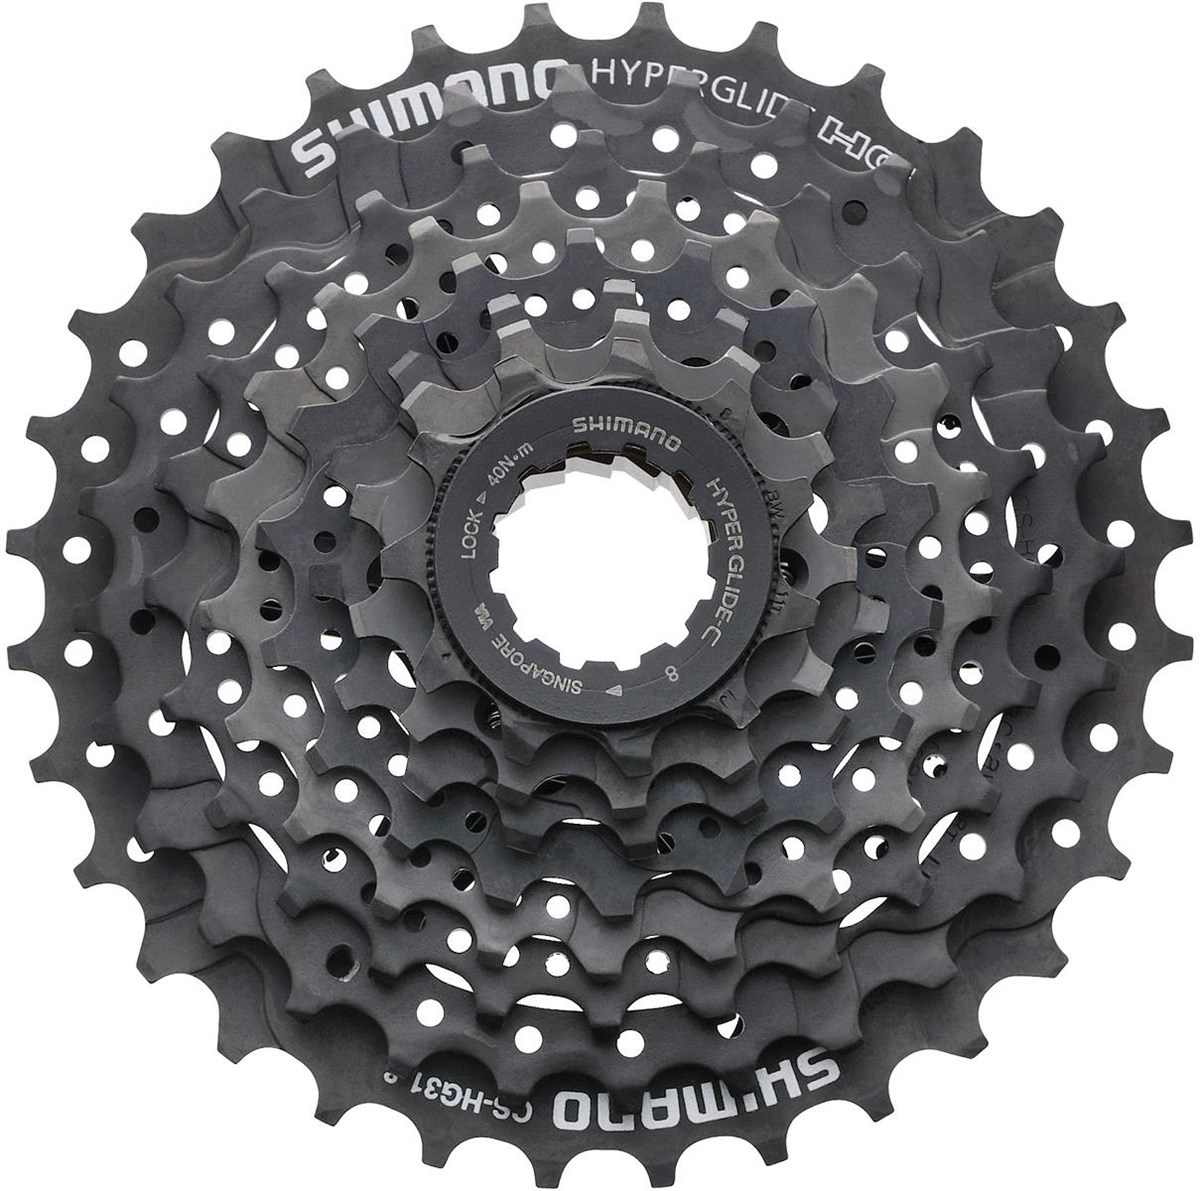 Shimano CS-HG31 8-Speed Cassette product image